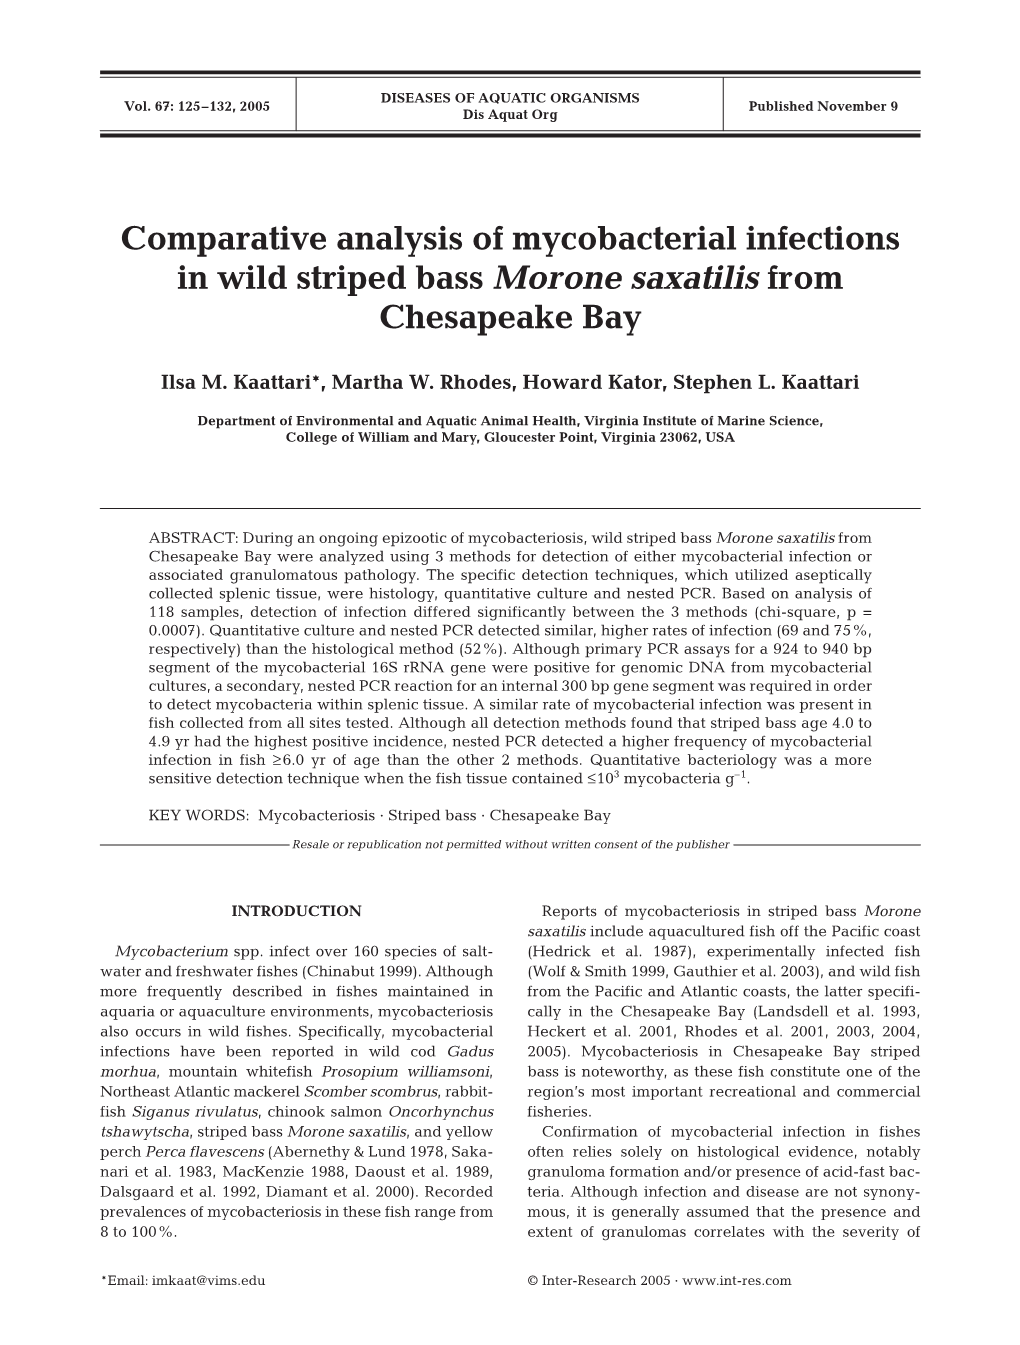 Comparative Analysis of Mycobacterial Infections in Wild Striped Bass Morone Saxatilis from Chesapeake Bay